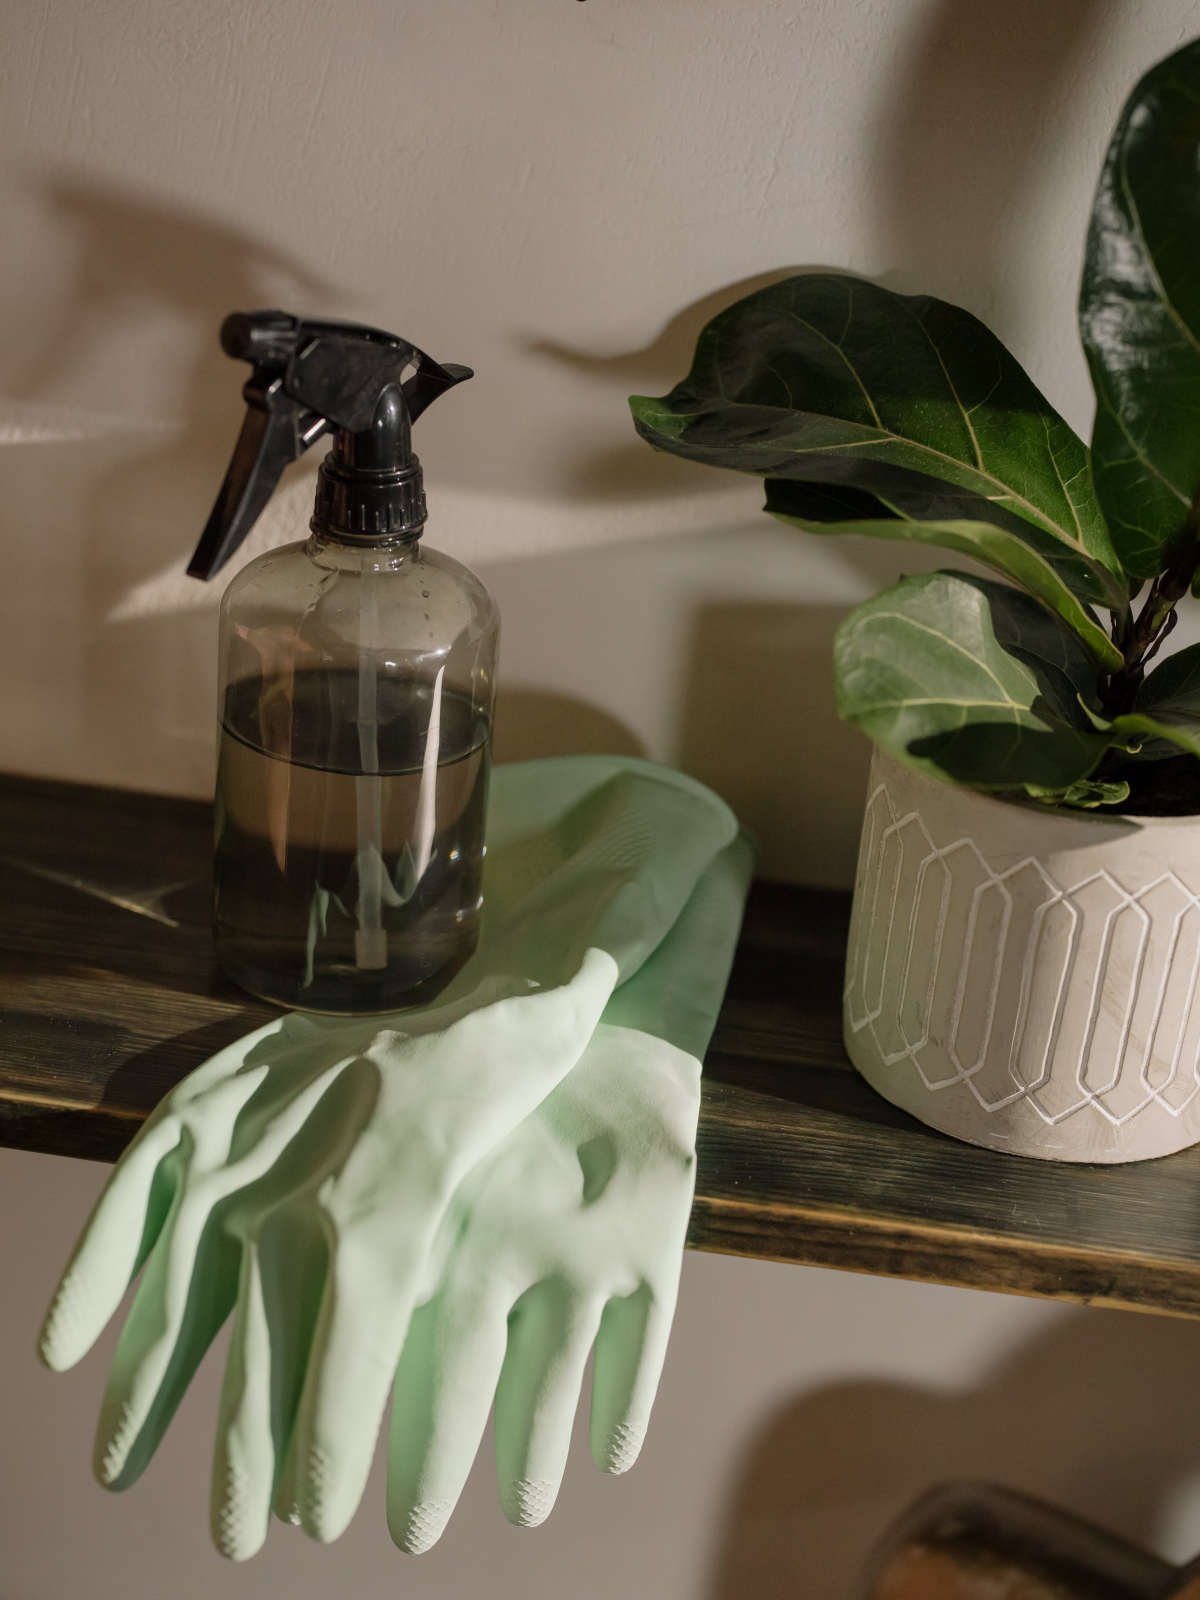 quartz cleaner spray and green cleaning gloves